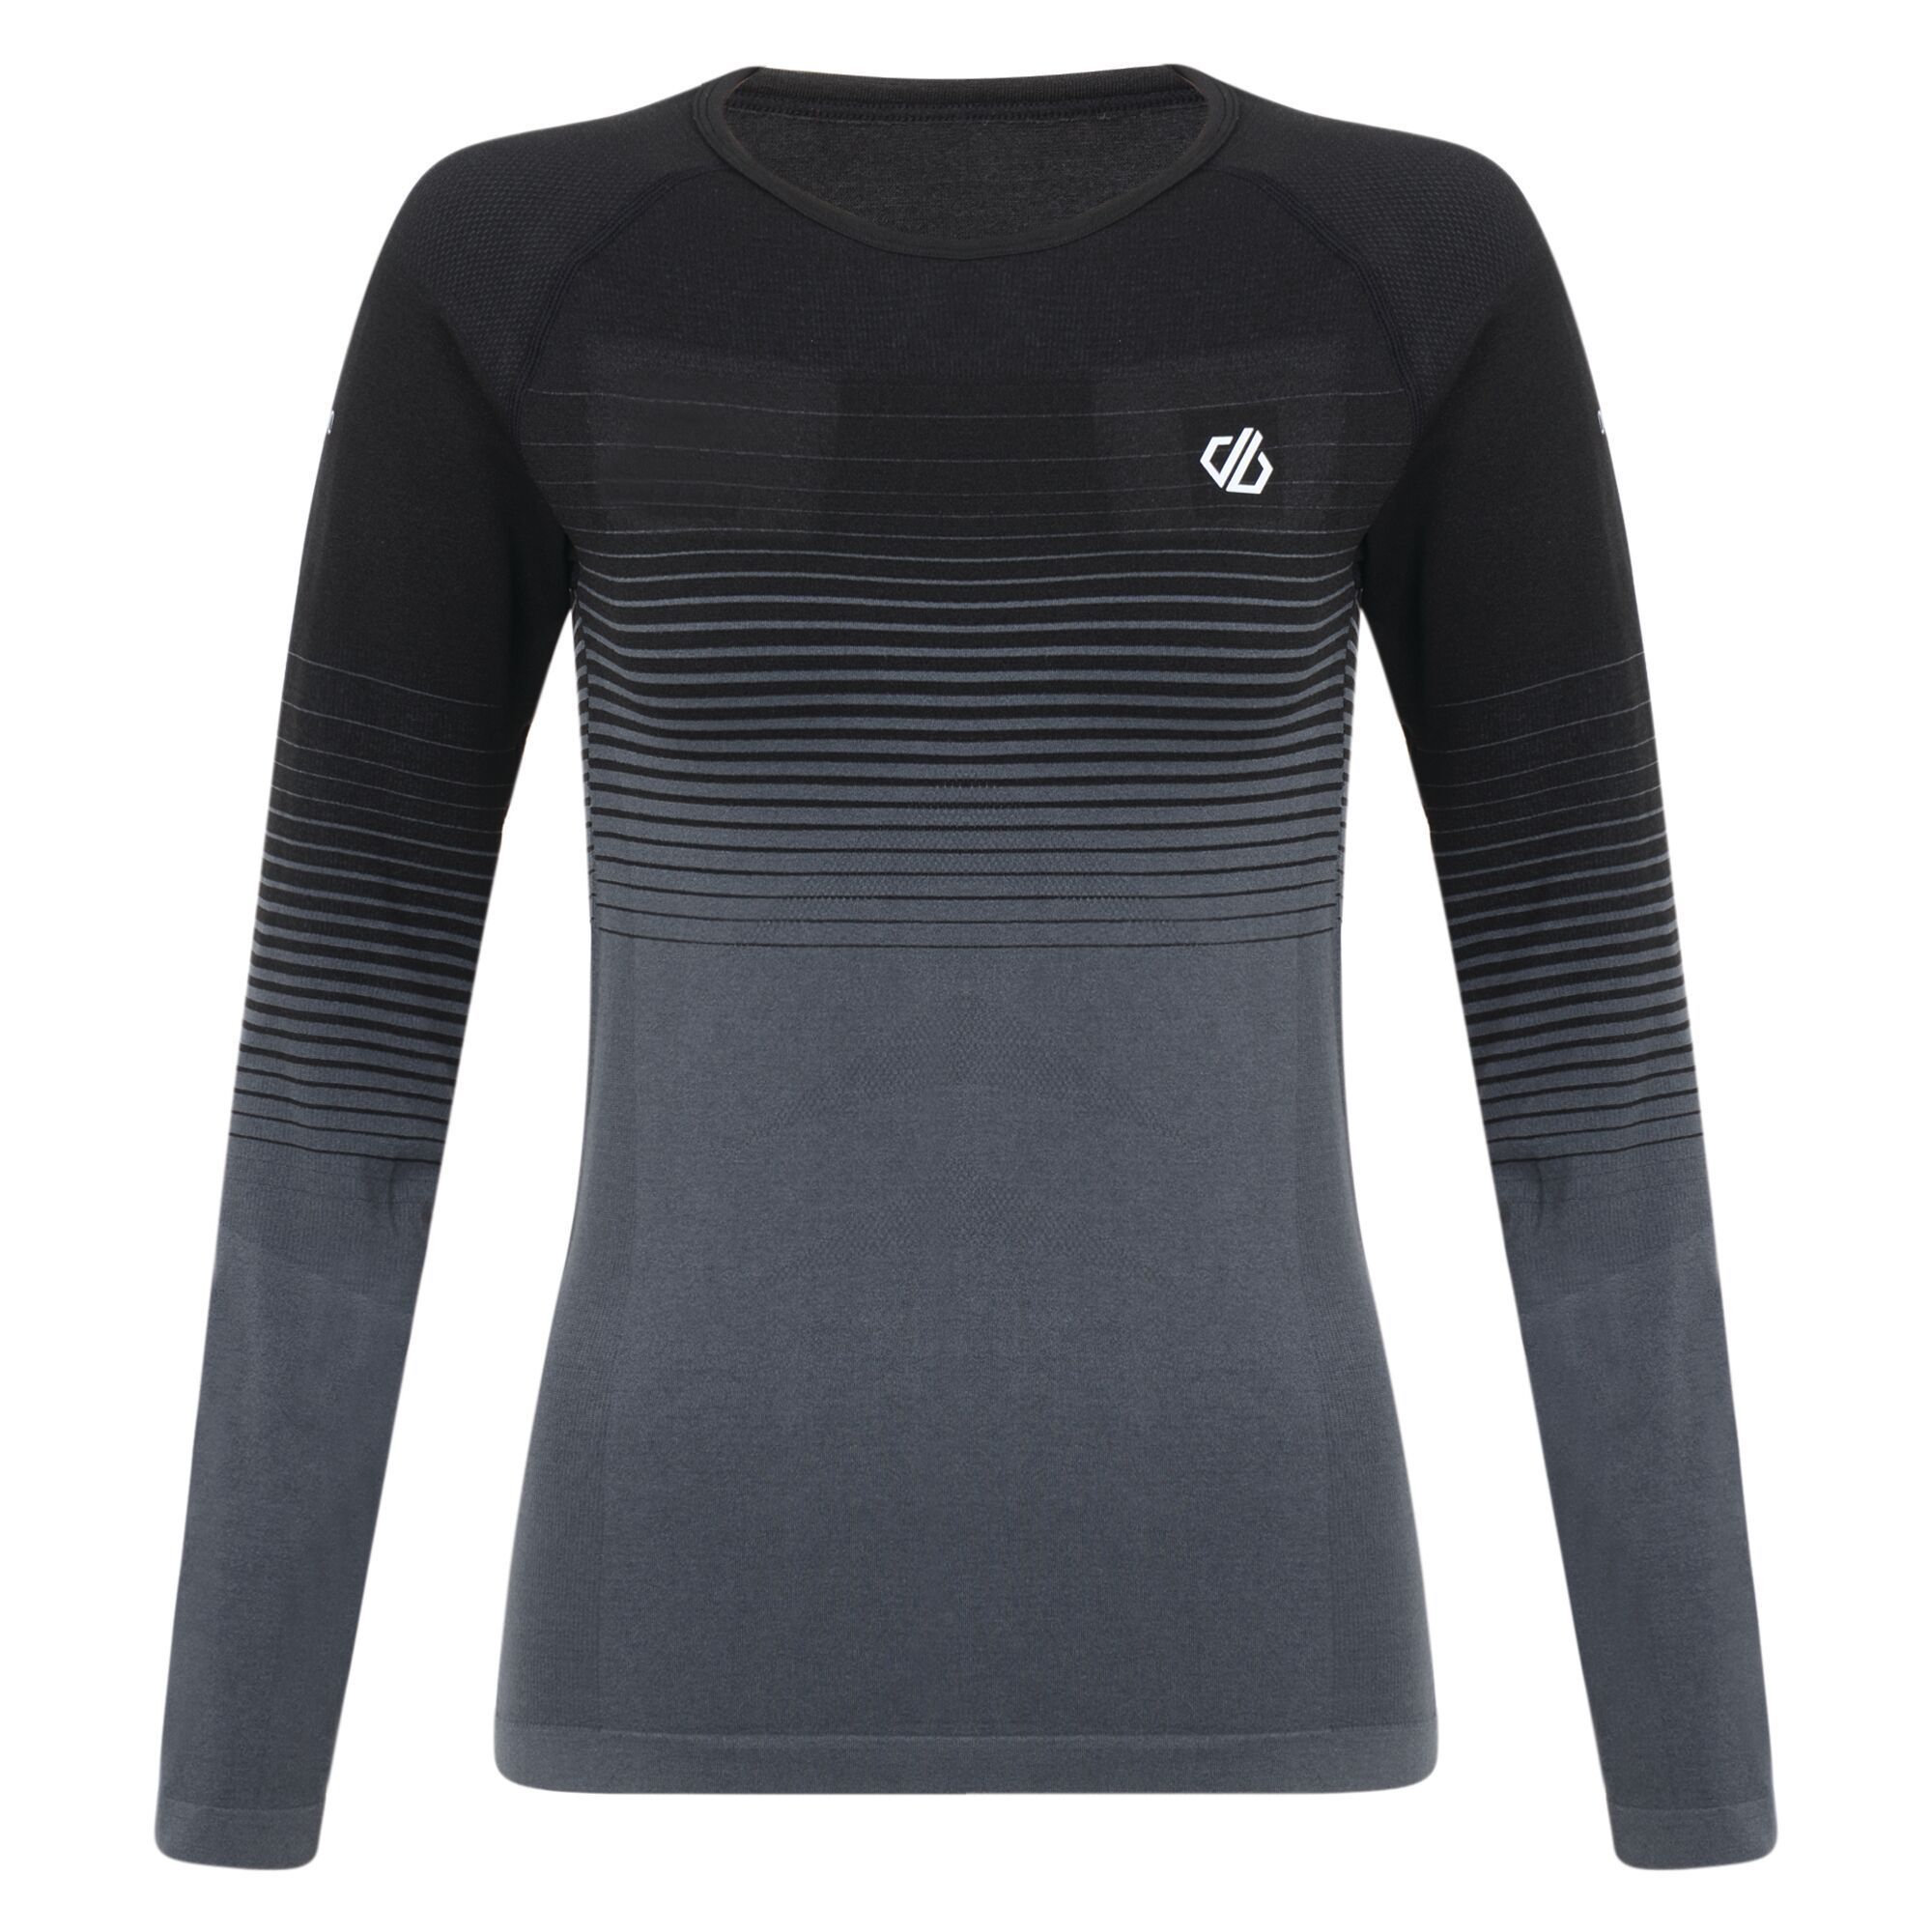 Performance base layer collection. SeamSmart Technology. Q-Wic Seamless polyester/elastane knitted fabric. Ergonomic body map fit. Fast wicking and quick drying properties.  odour control treatment. Dare 2B Womens Sizing (chest approx): 6 (30in/76cm), 8 (32in/81cm), 10 (34in/86cm), 12 (36in/92cm), 14 (38in/97cm), 16 (40in/102cm), 18 (42in/107cm), 20 (44in/112cm), 22 (46in/117cm), 24 (48in/122cm). Dare 2B Womens Trousers Sizing (waist approx): 6 (22in/56cm), 8 (24in/61cm), 10 (26in/66cm), 12 (28in/71cm), 14 (30in/76cm), 16 (32in/81cm), 18 (34in/86cm), 20 (36in/92cm).